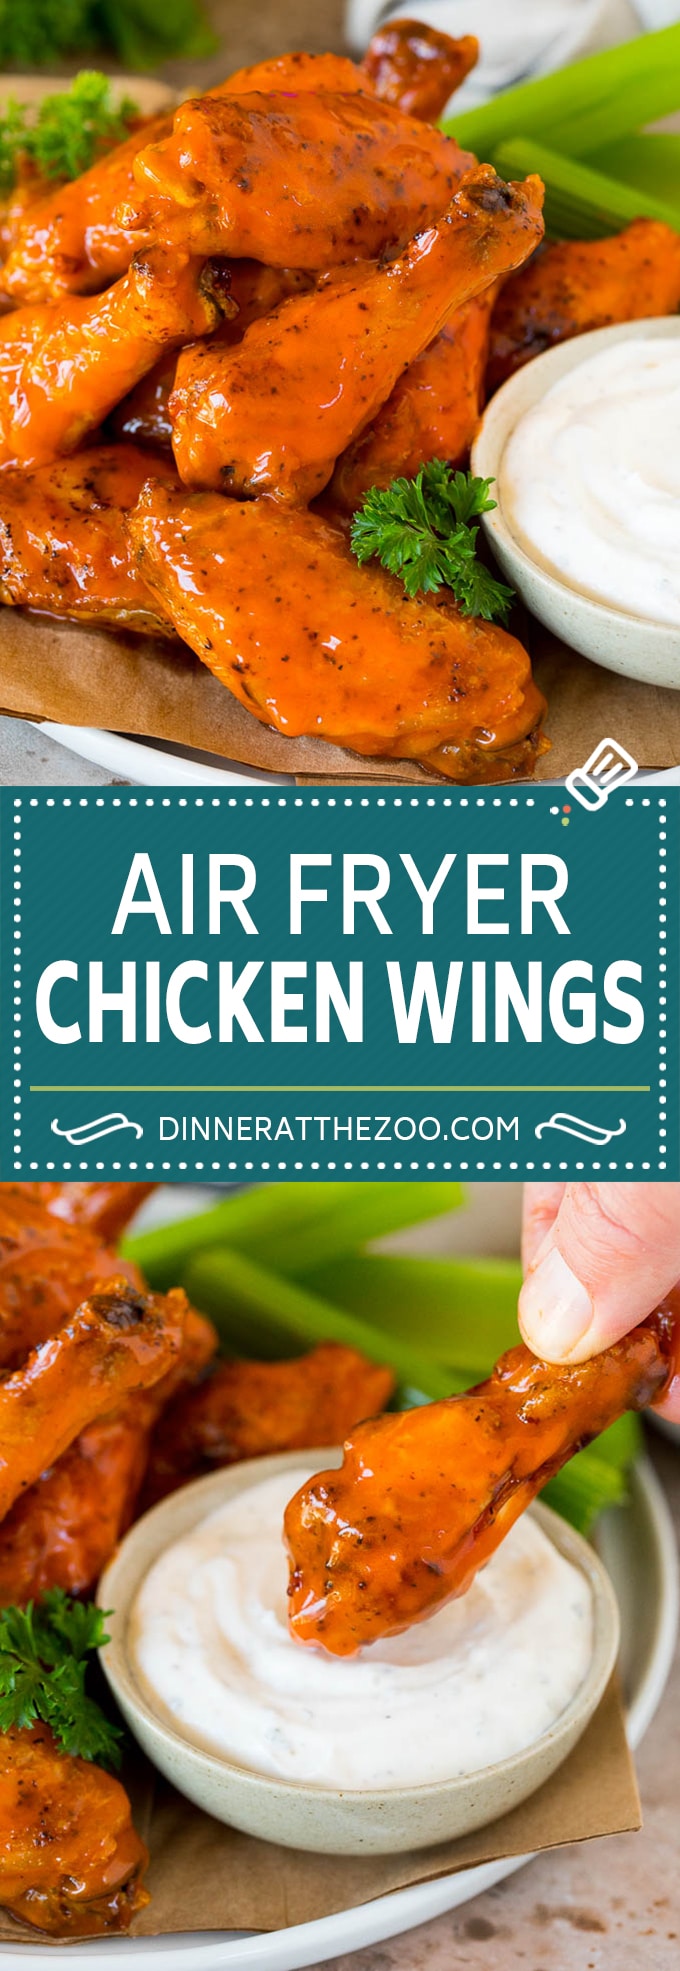 These air fryer chicken wings come out perfectly crispy every time, and cook so much faster than they would in a traditional oven.